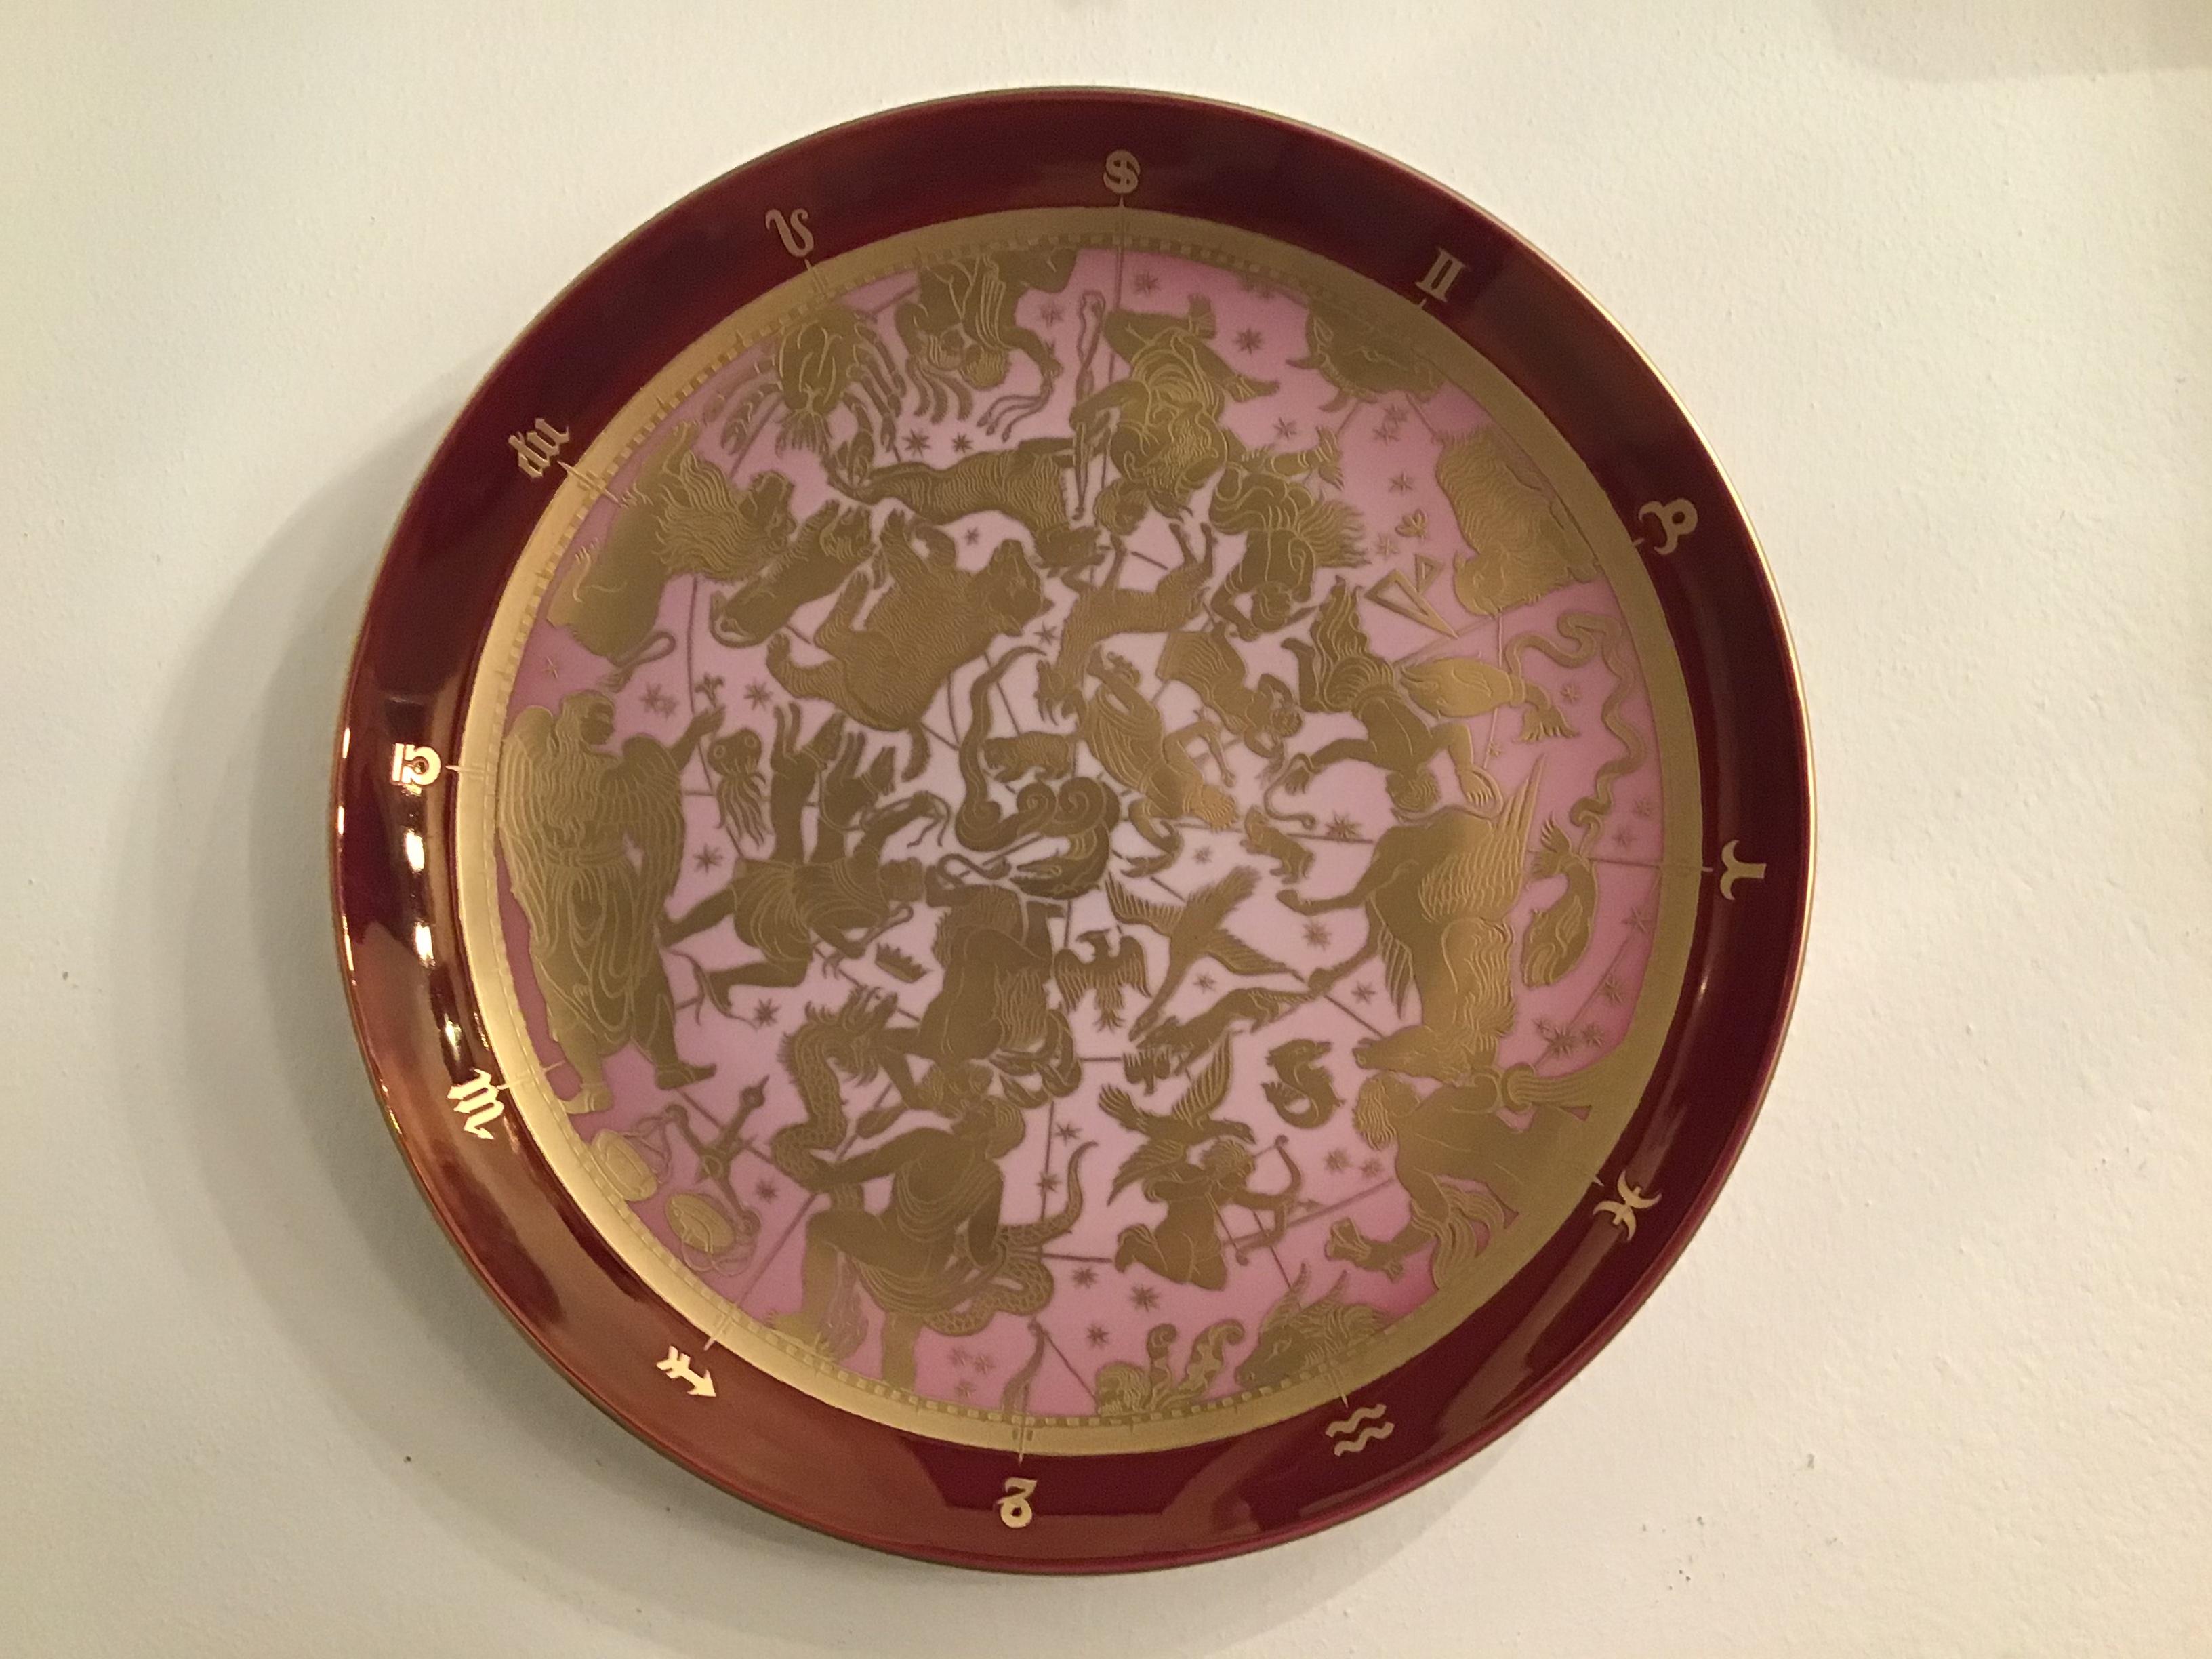 Morbelli Porcelain Wall Plate “Planisfero Celeste” Worked with Pure Gold 1960 It For Sale 8